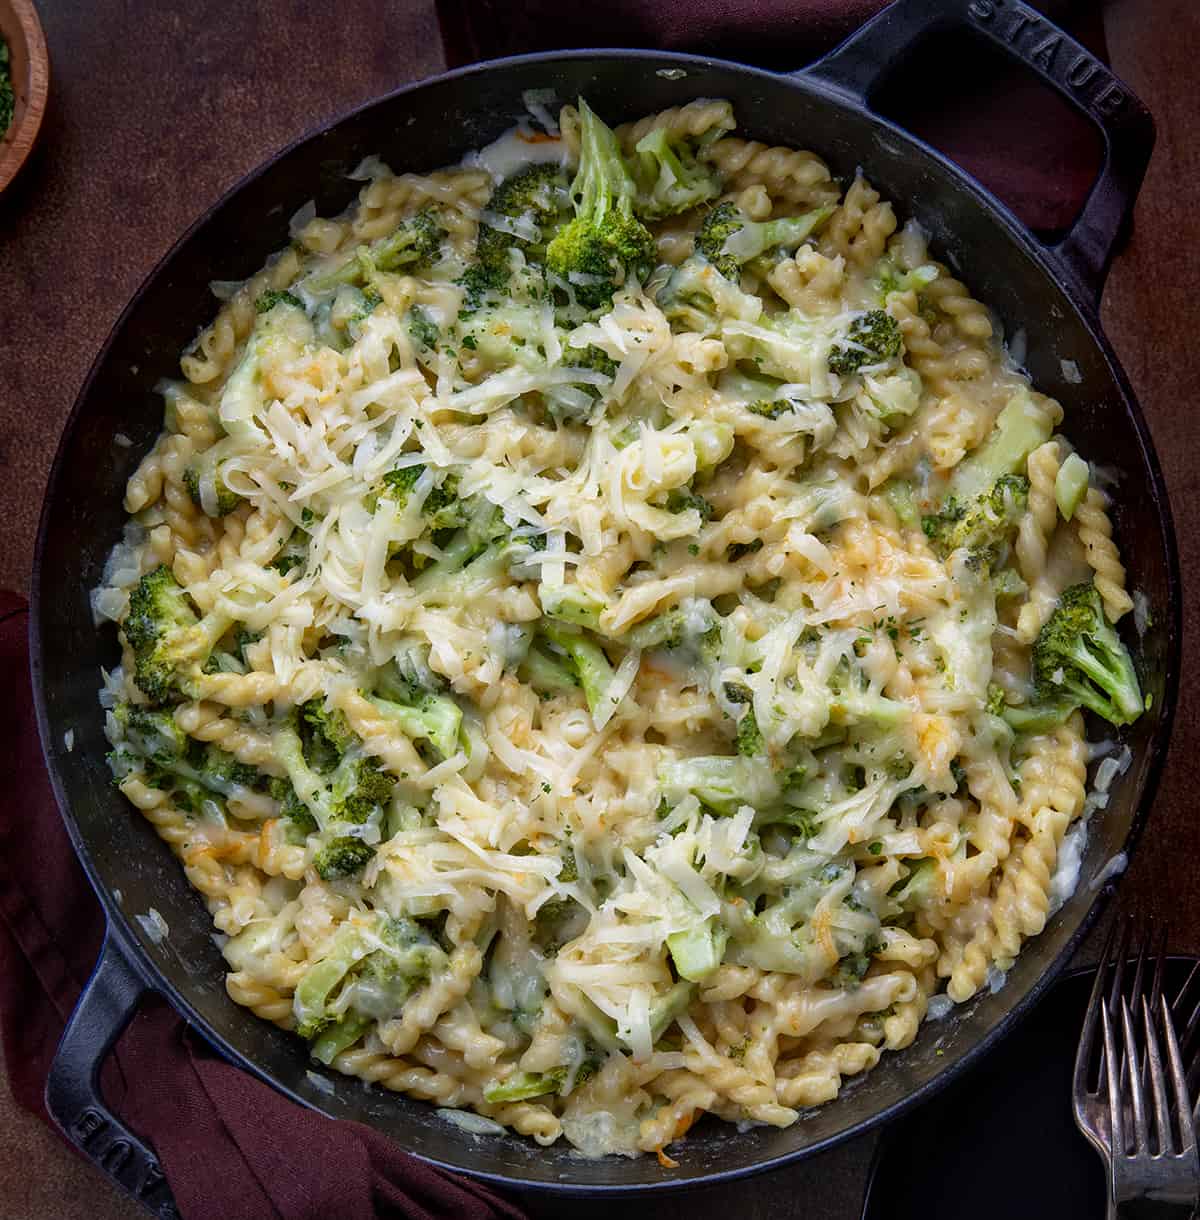 Broccoli Cheese Pasta in a Skillet on a Dark Table from Overhead.